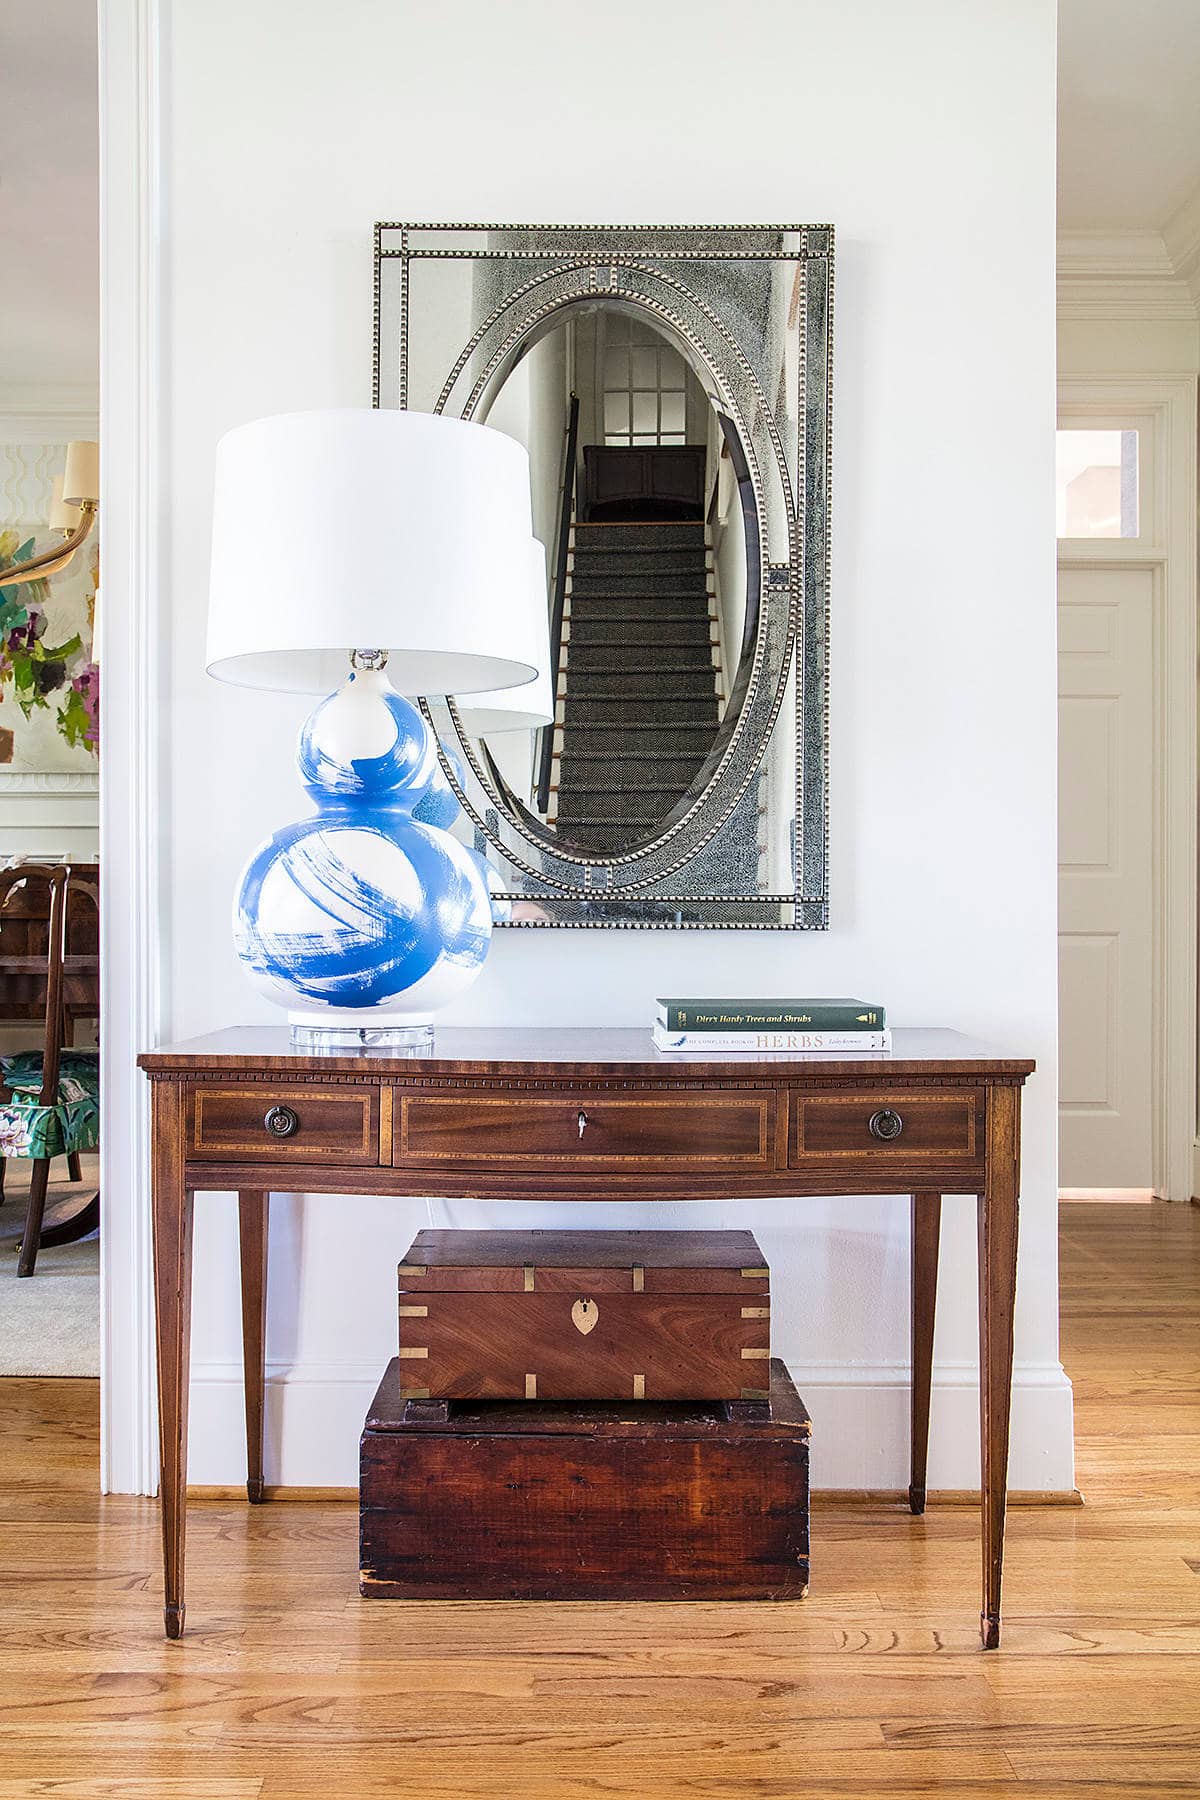 Home tour: Entryway console table and mirror with white and blue table lamp